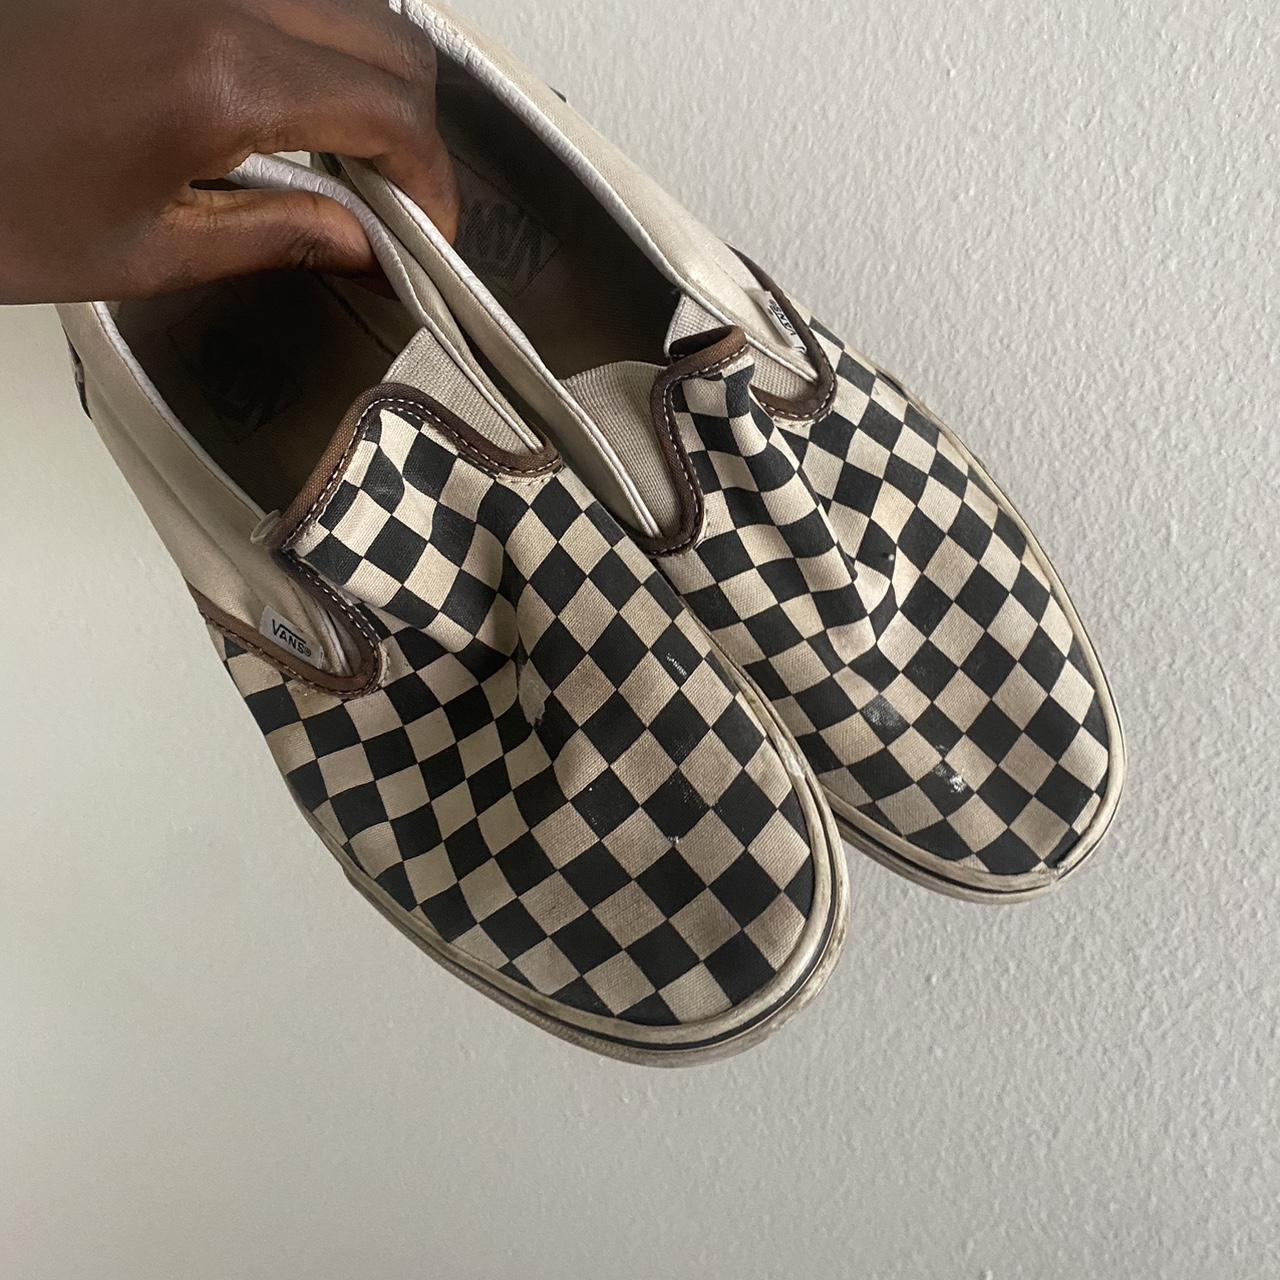 Checkered Vans size 13 Do not offer if you don't... - Depop